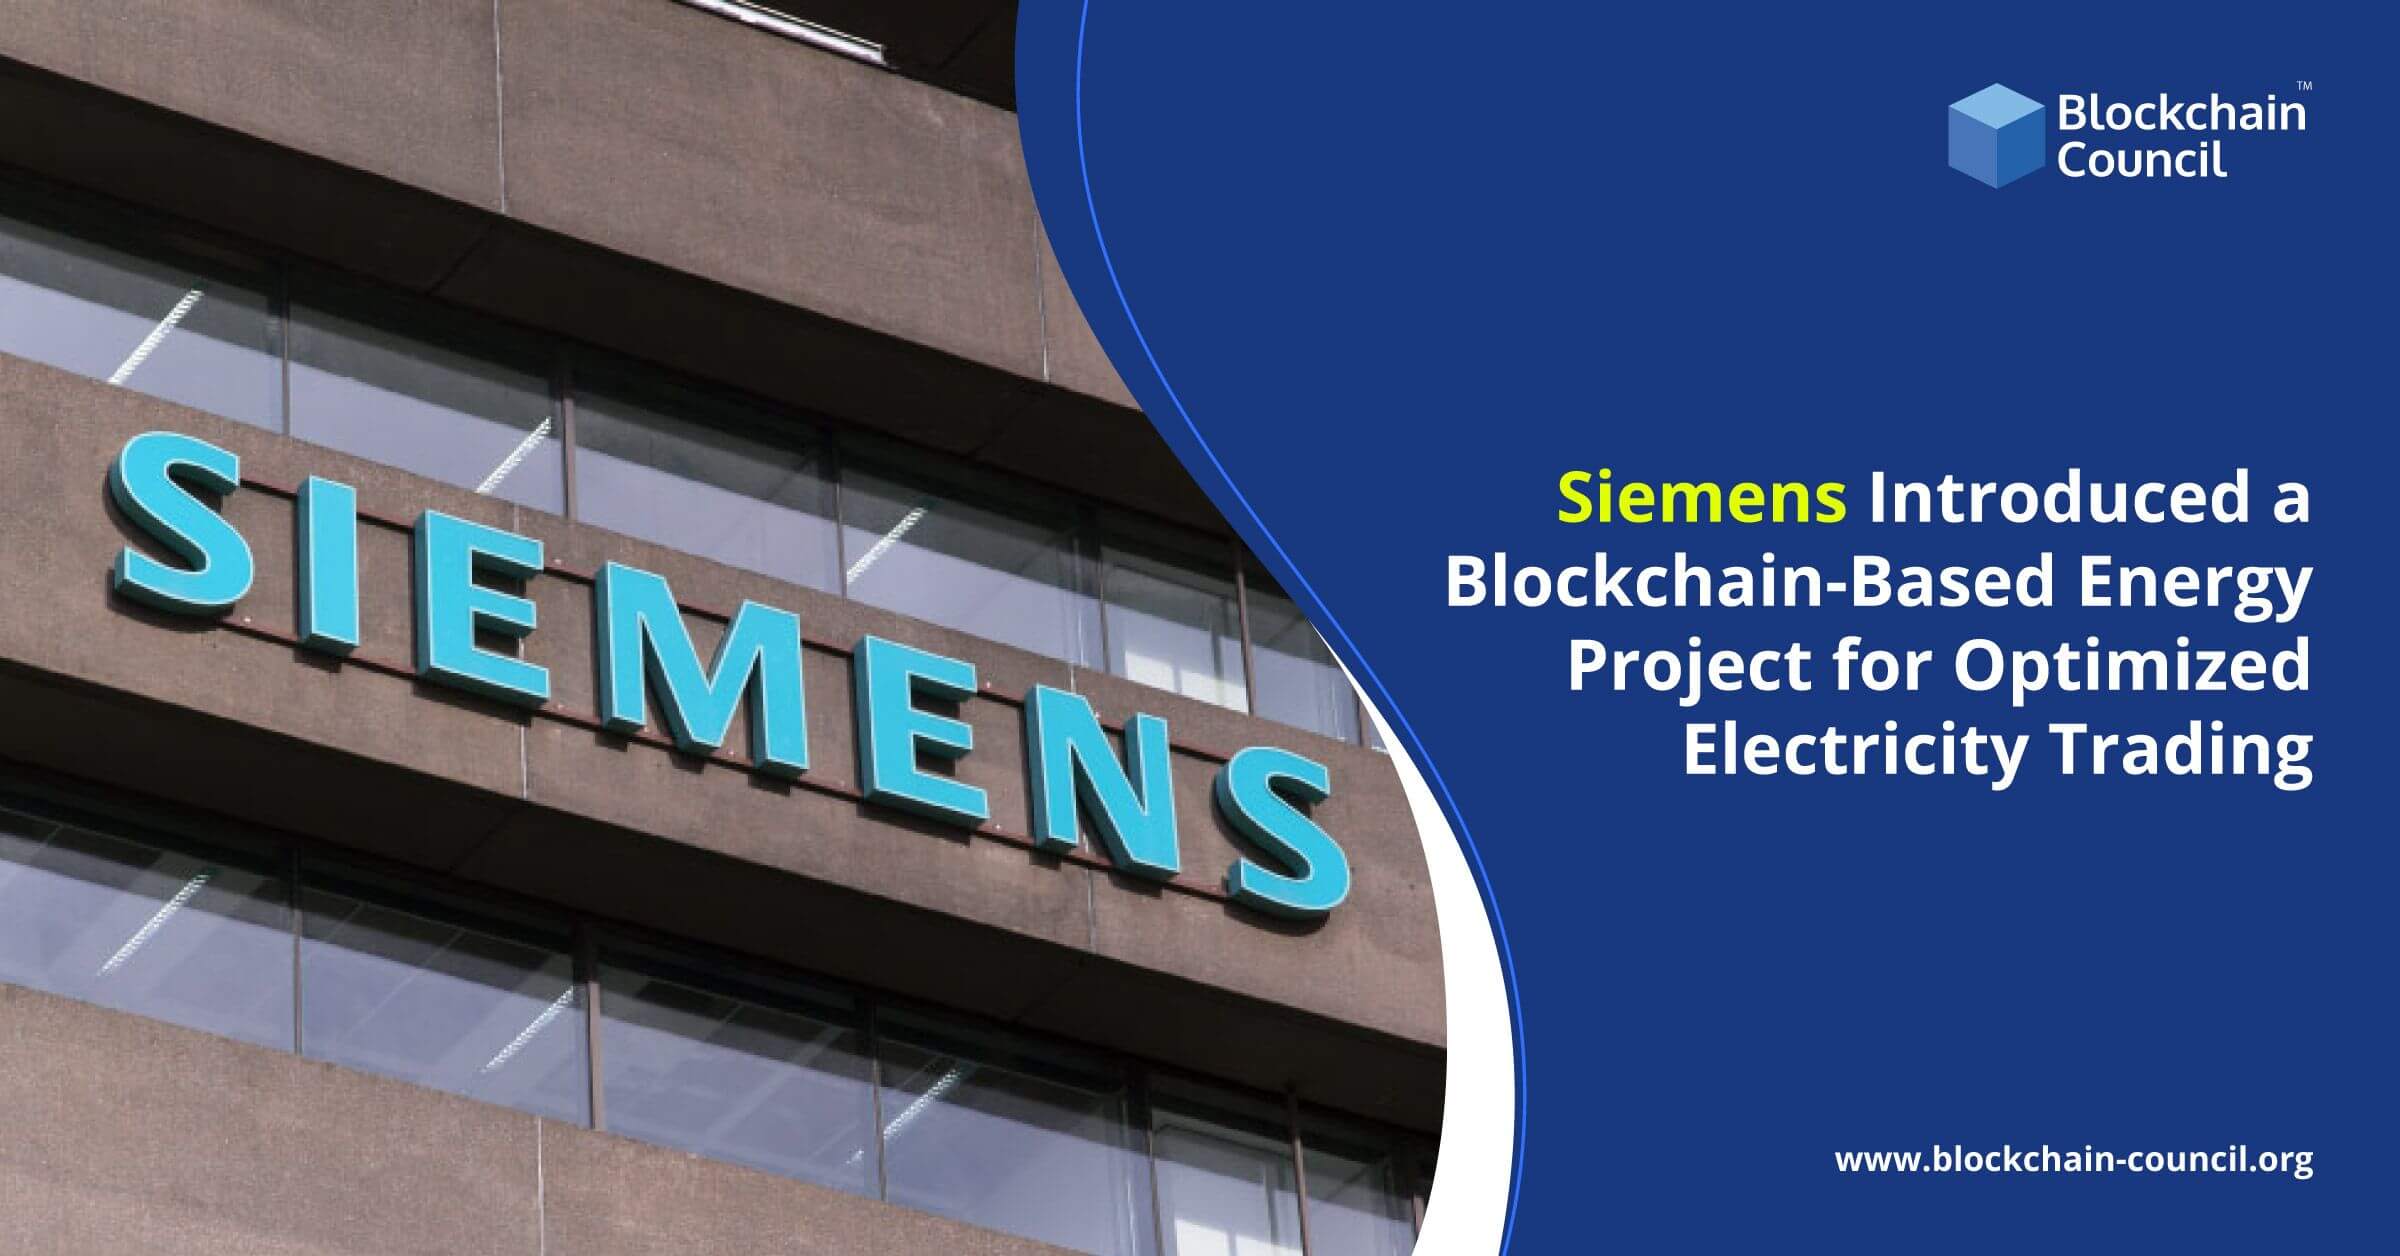 Siemens-Introduced-a-Blockchain-Based-Energy-Project -for- Optimized -Electricity-Trading